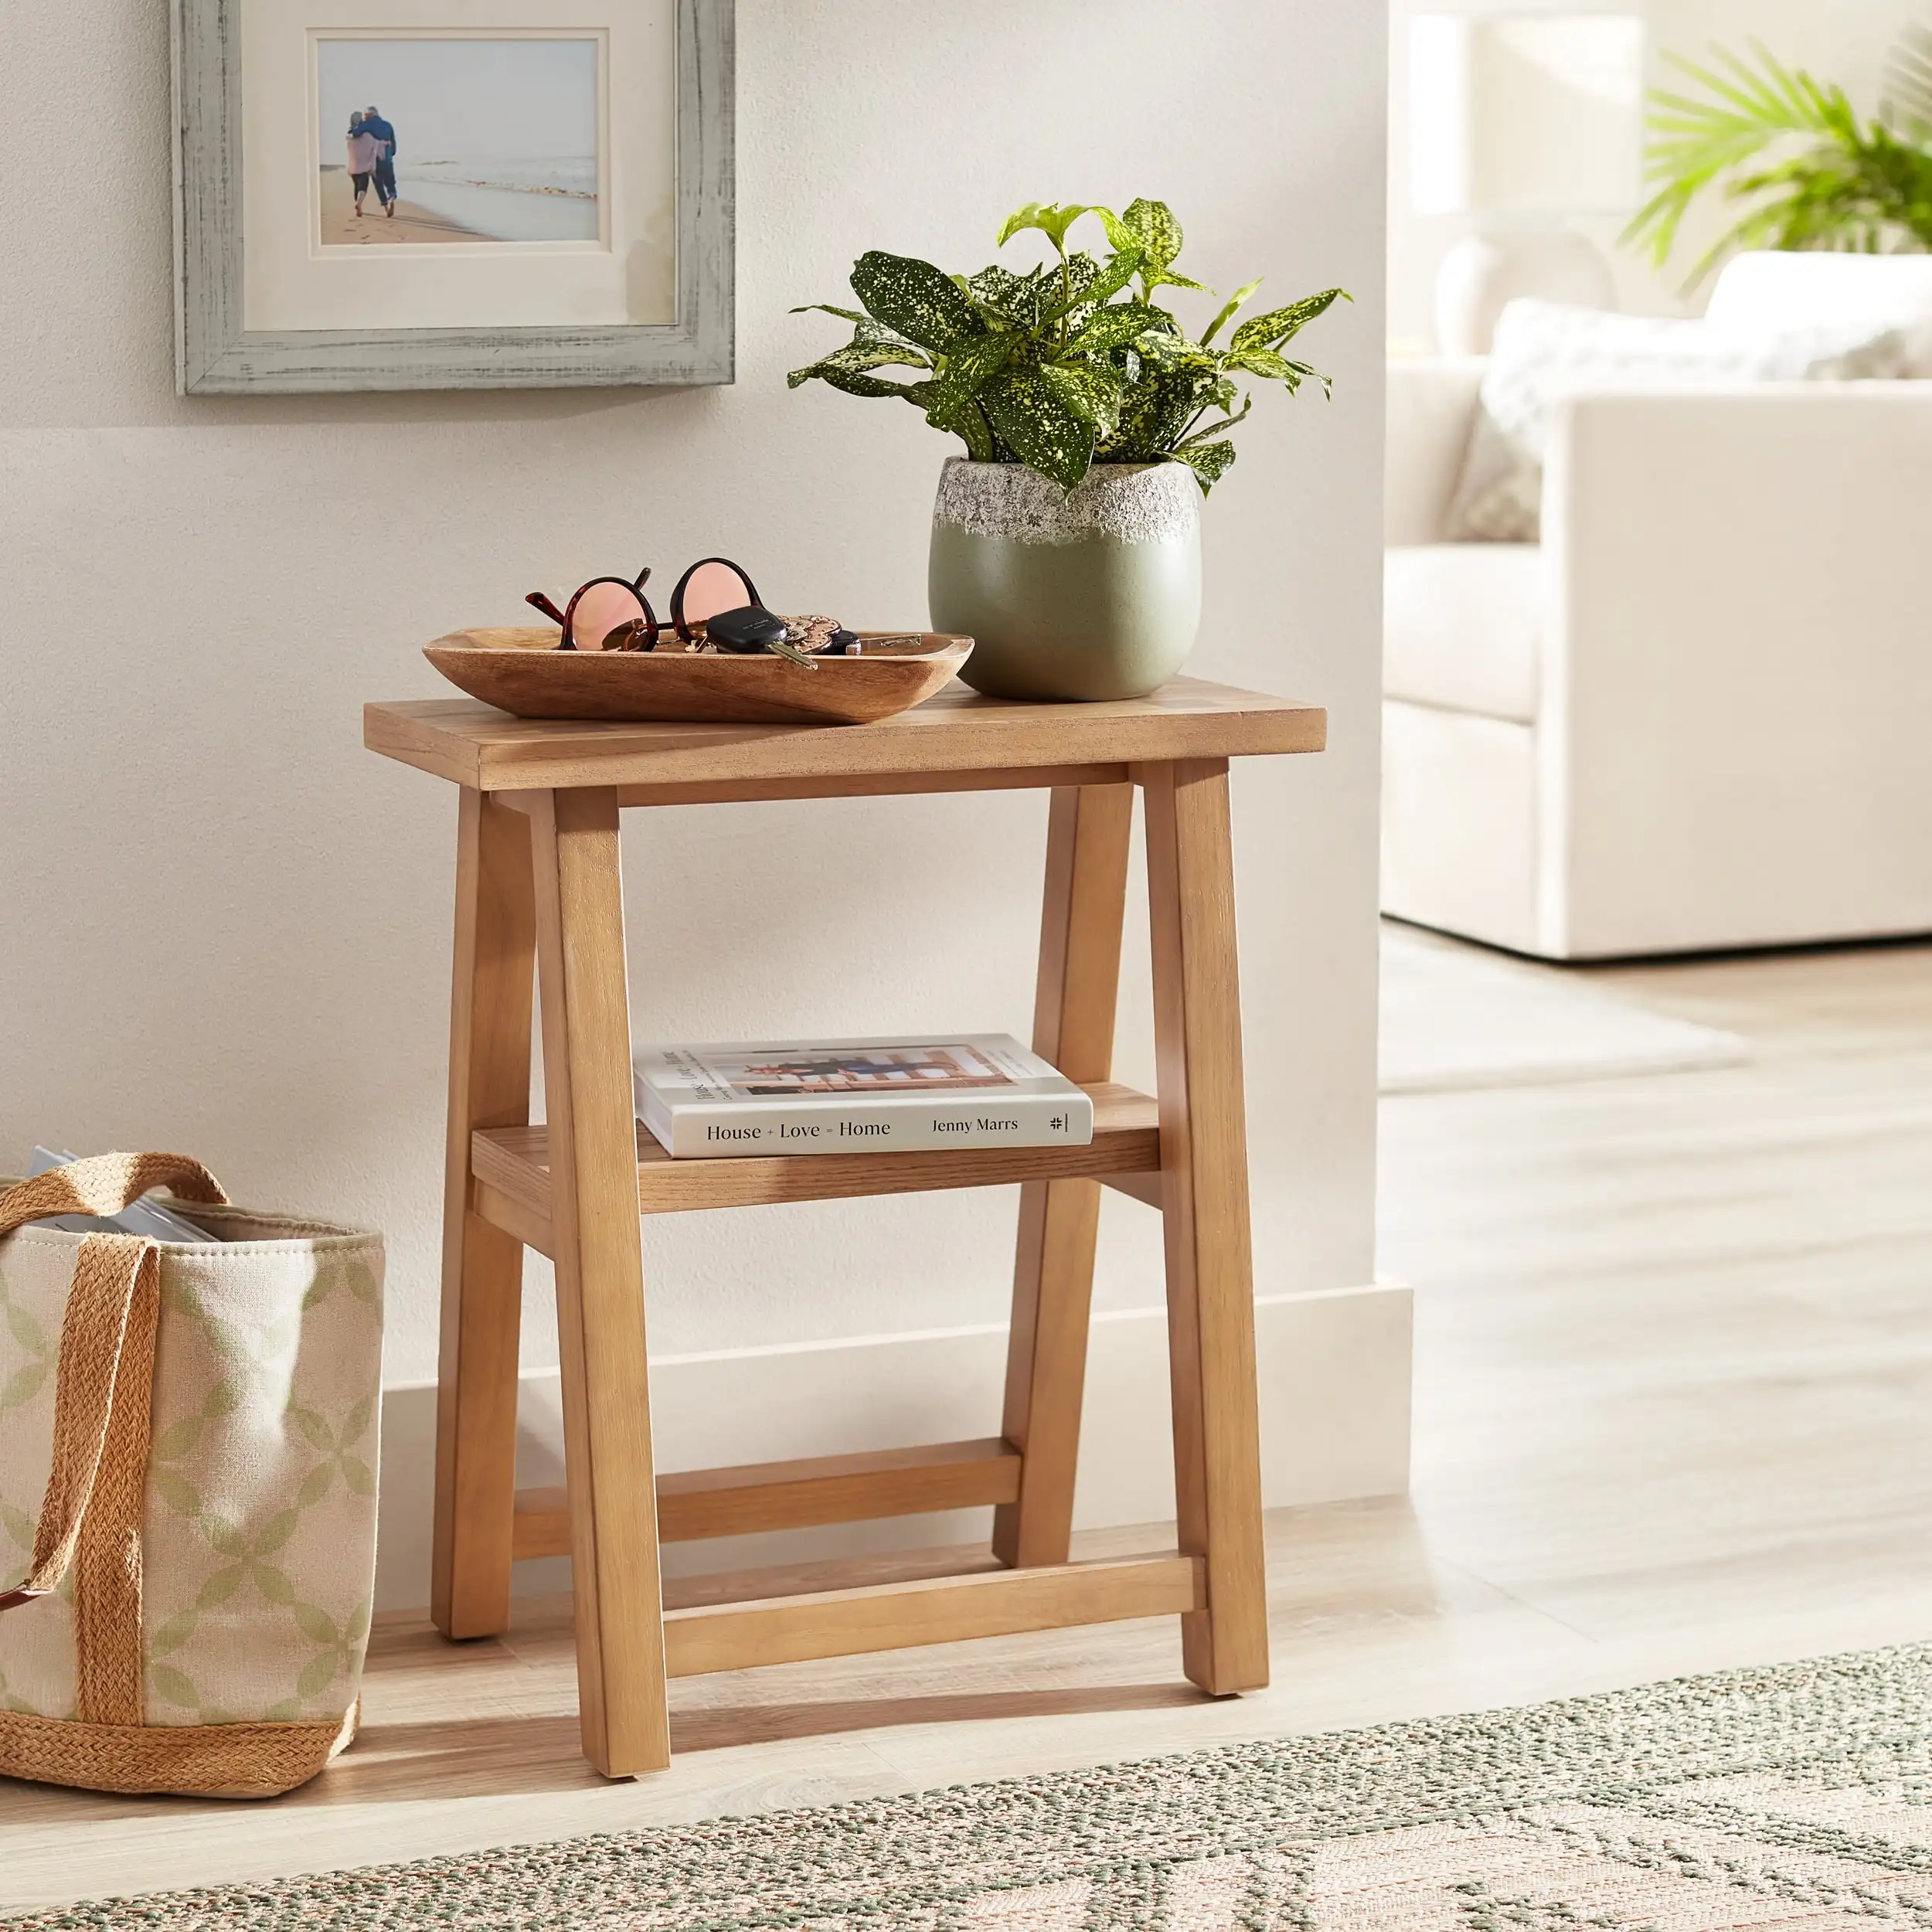 

Better Homes & Gardens Parkridge Solid Wood Narrow Accent Styling Table Natural Oak Finish By Dave & Jenny Marrs